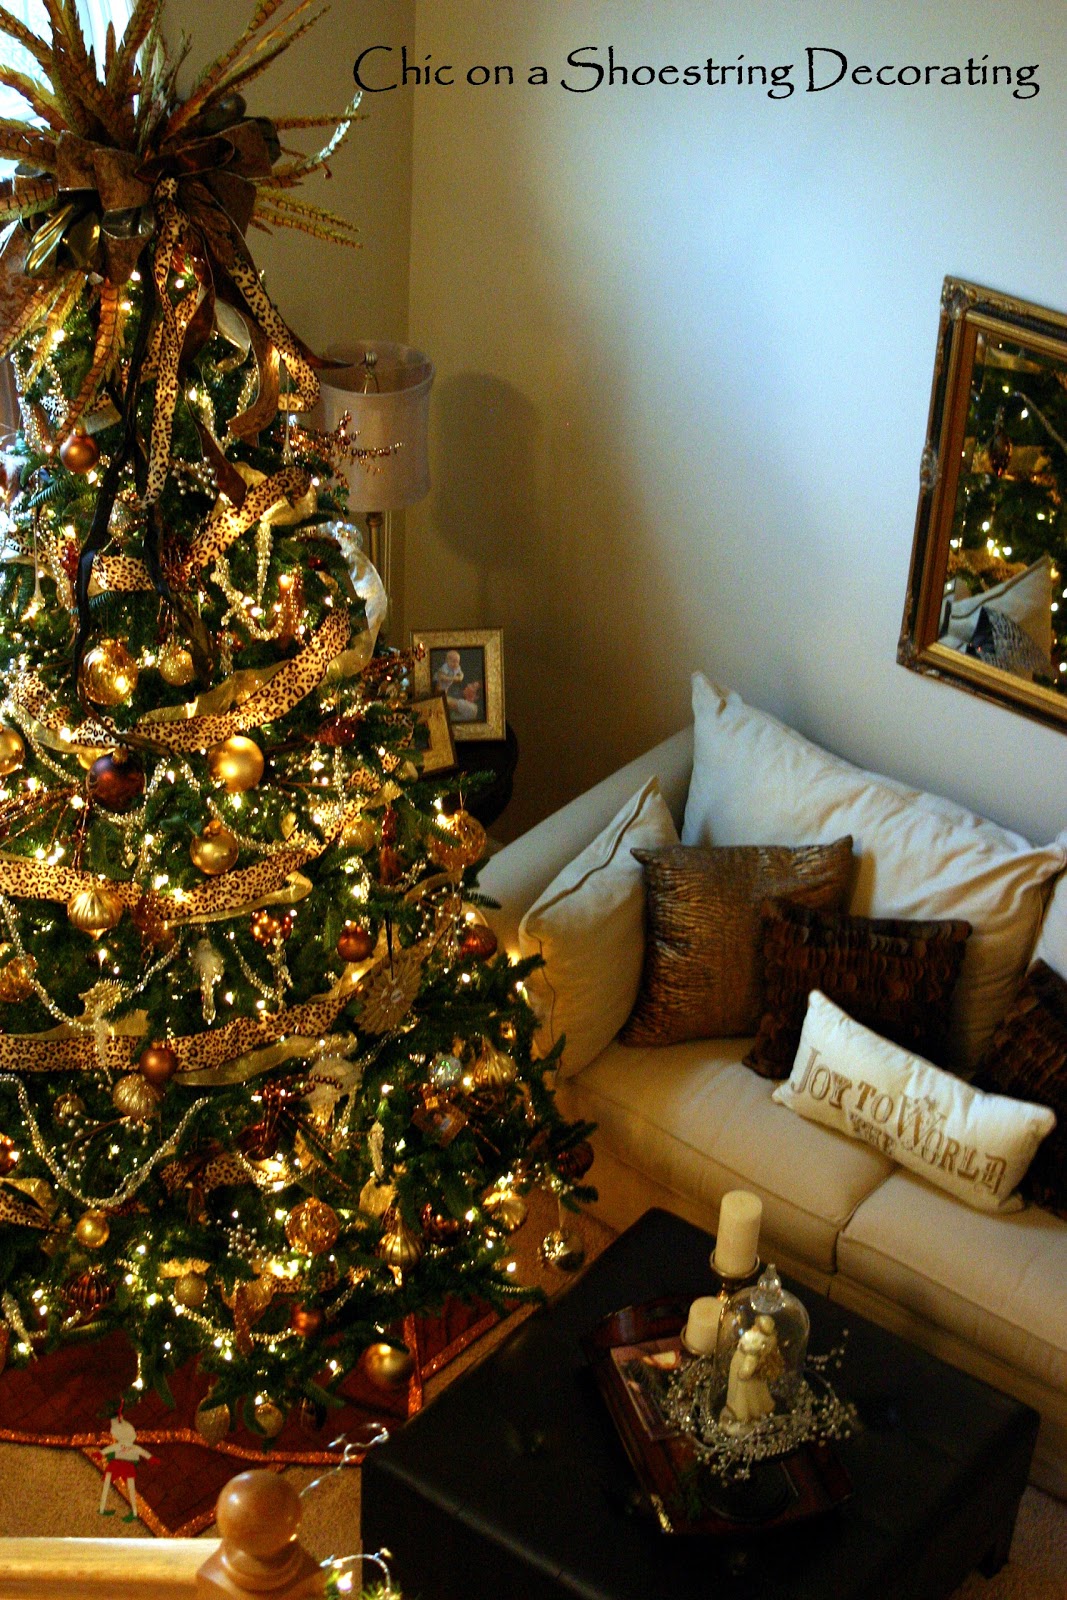 Chic on a Shoestring Decorating: My Fancy Christmas Tree with a touch ...